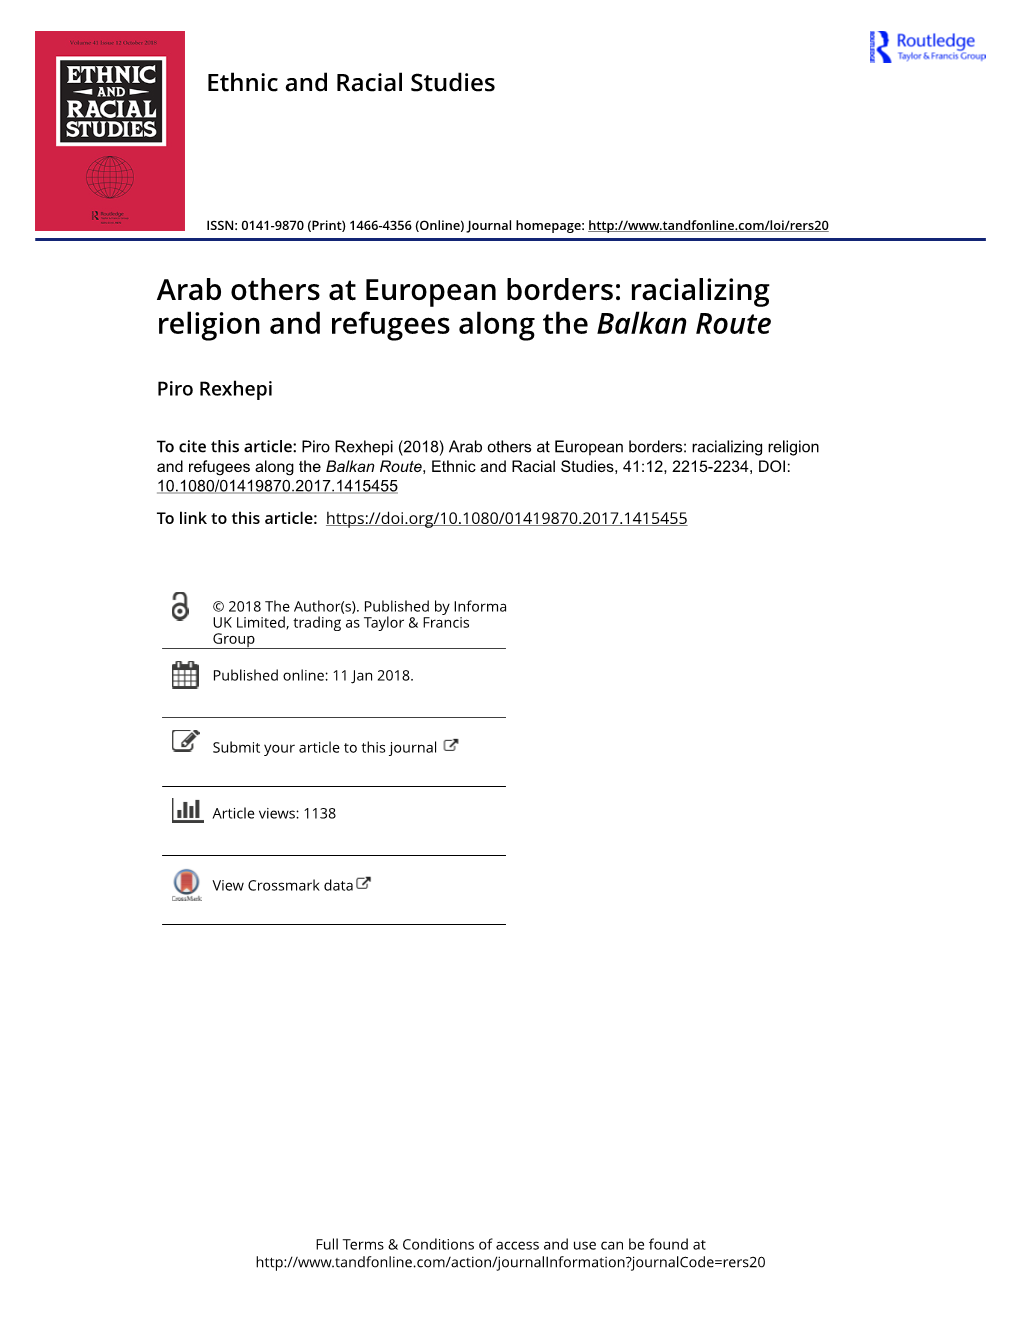 Racializing Religion and Refugees Along the Balkan Route